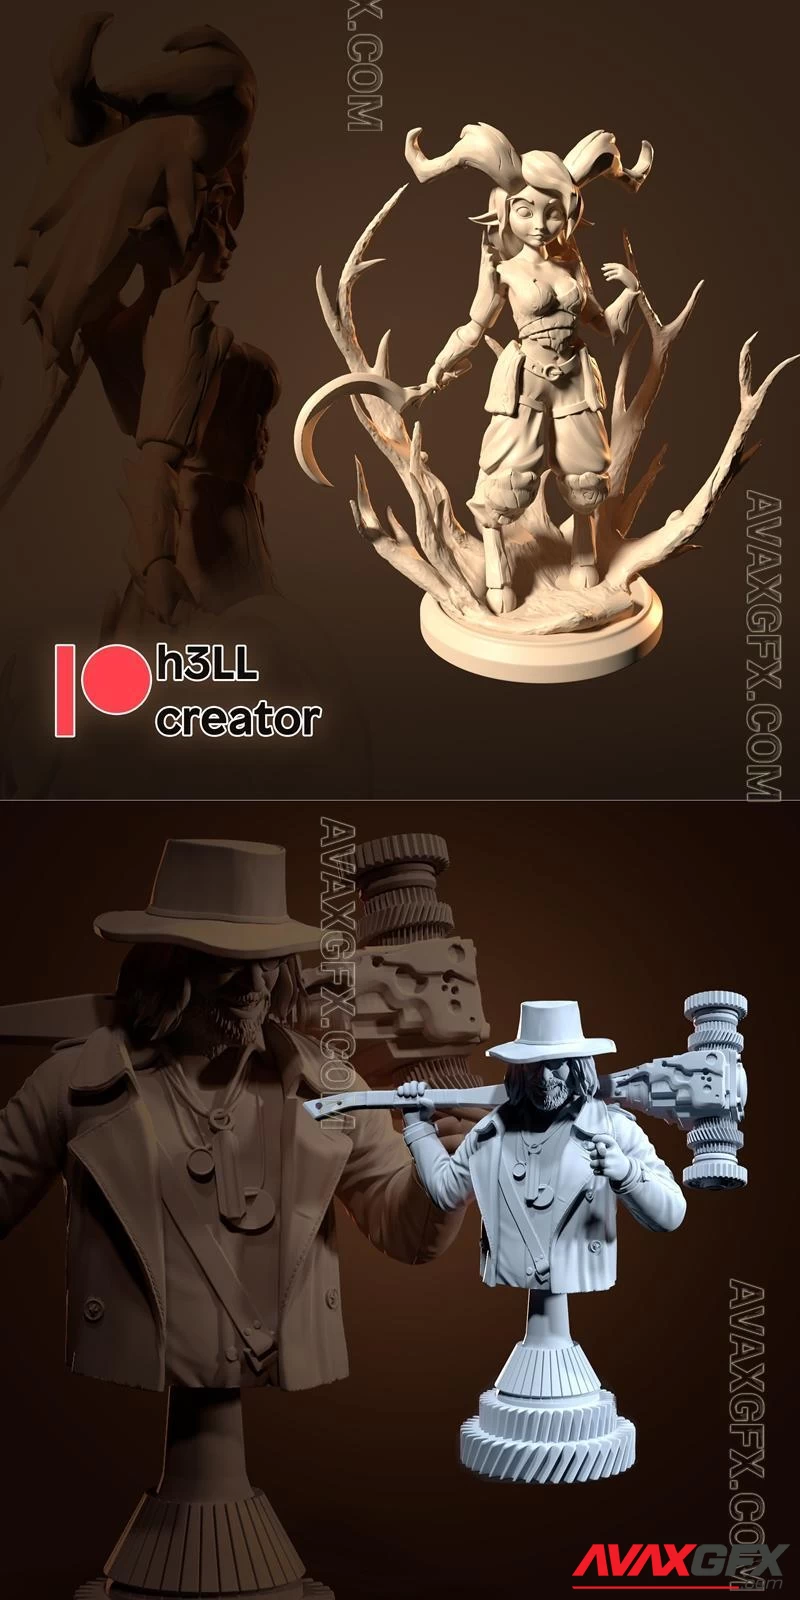 h3LL creator - Satyr with sickle and Heisenberg Bust - STL 3D Model